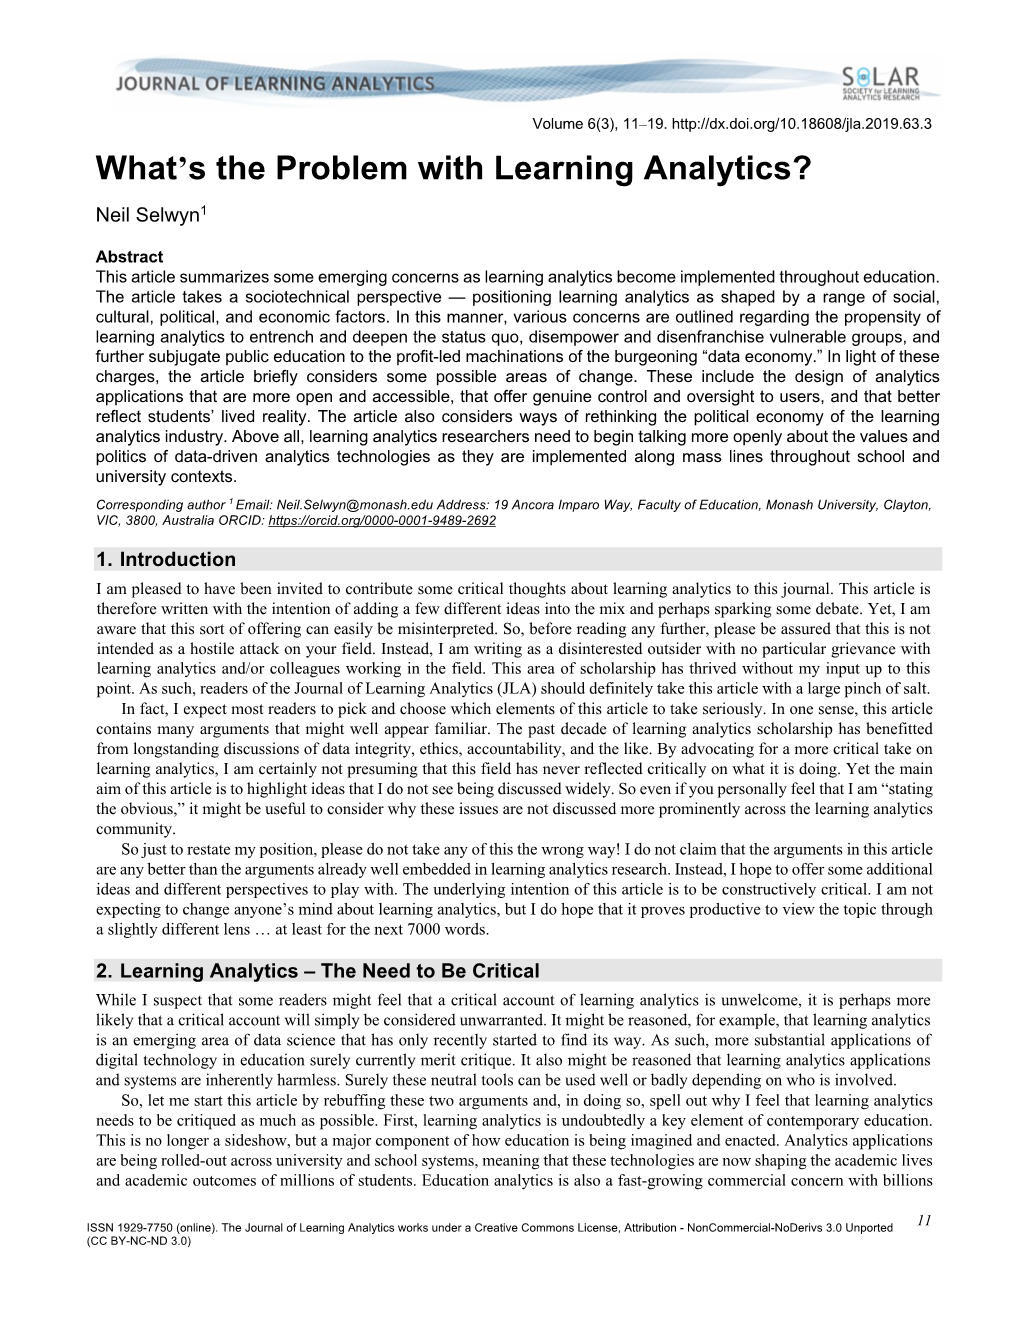 What's the Problem with Learning Analytics?